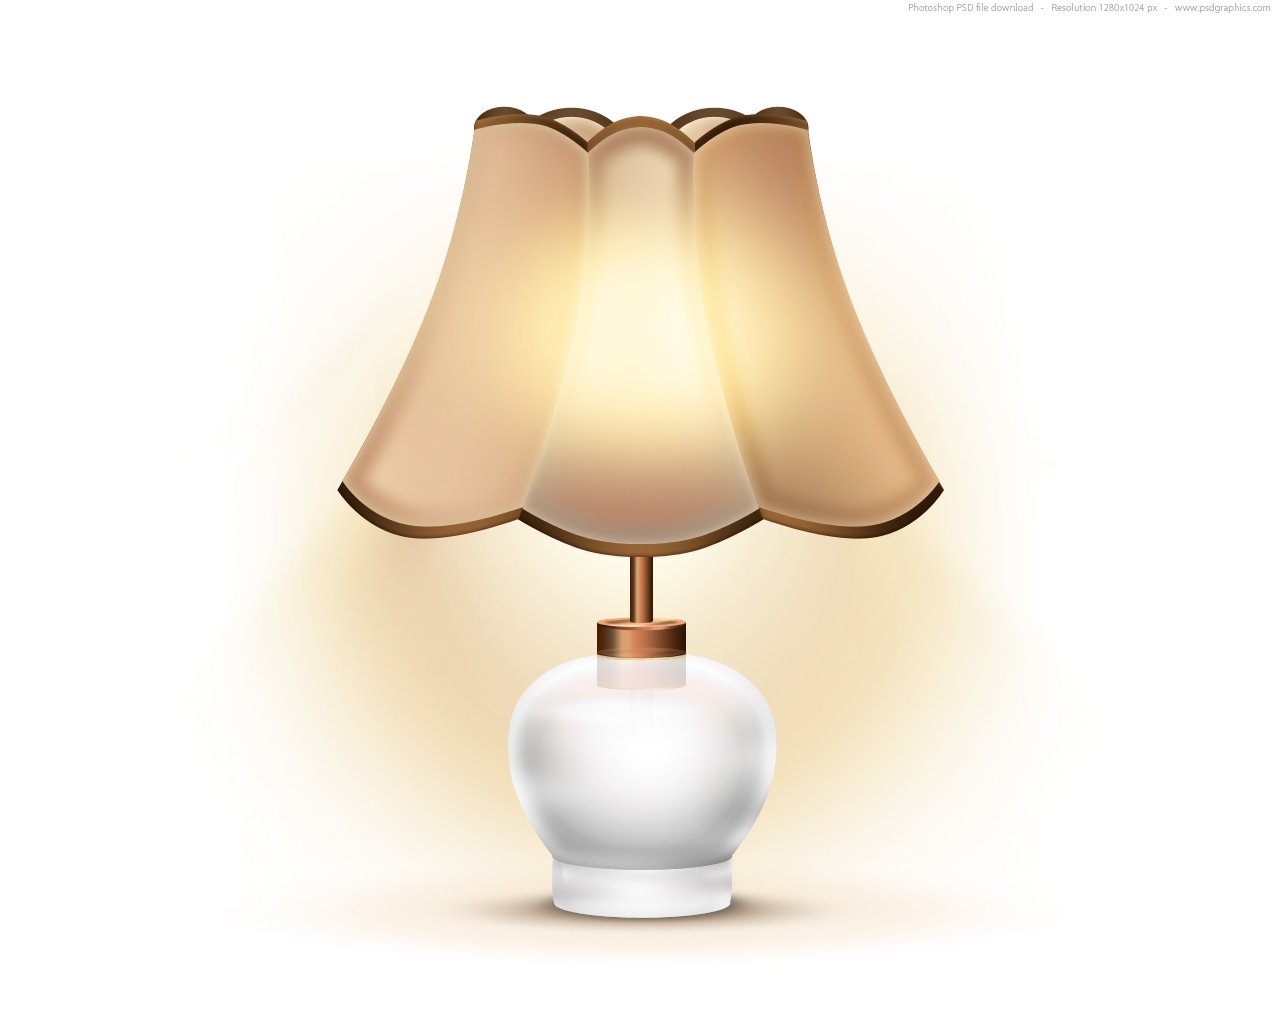 Old table lamp icon (PSD) | PSDGraphics